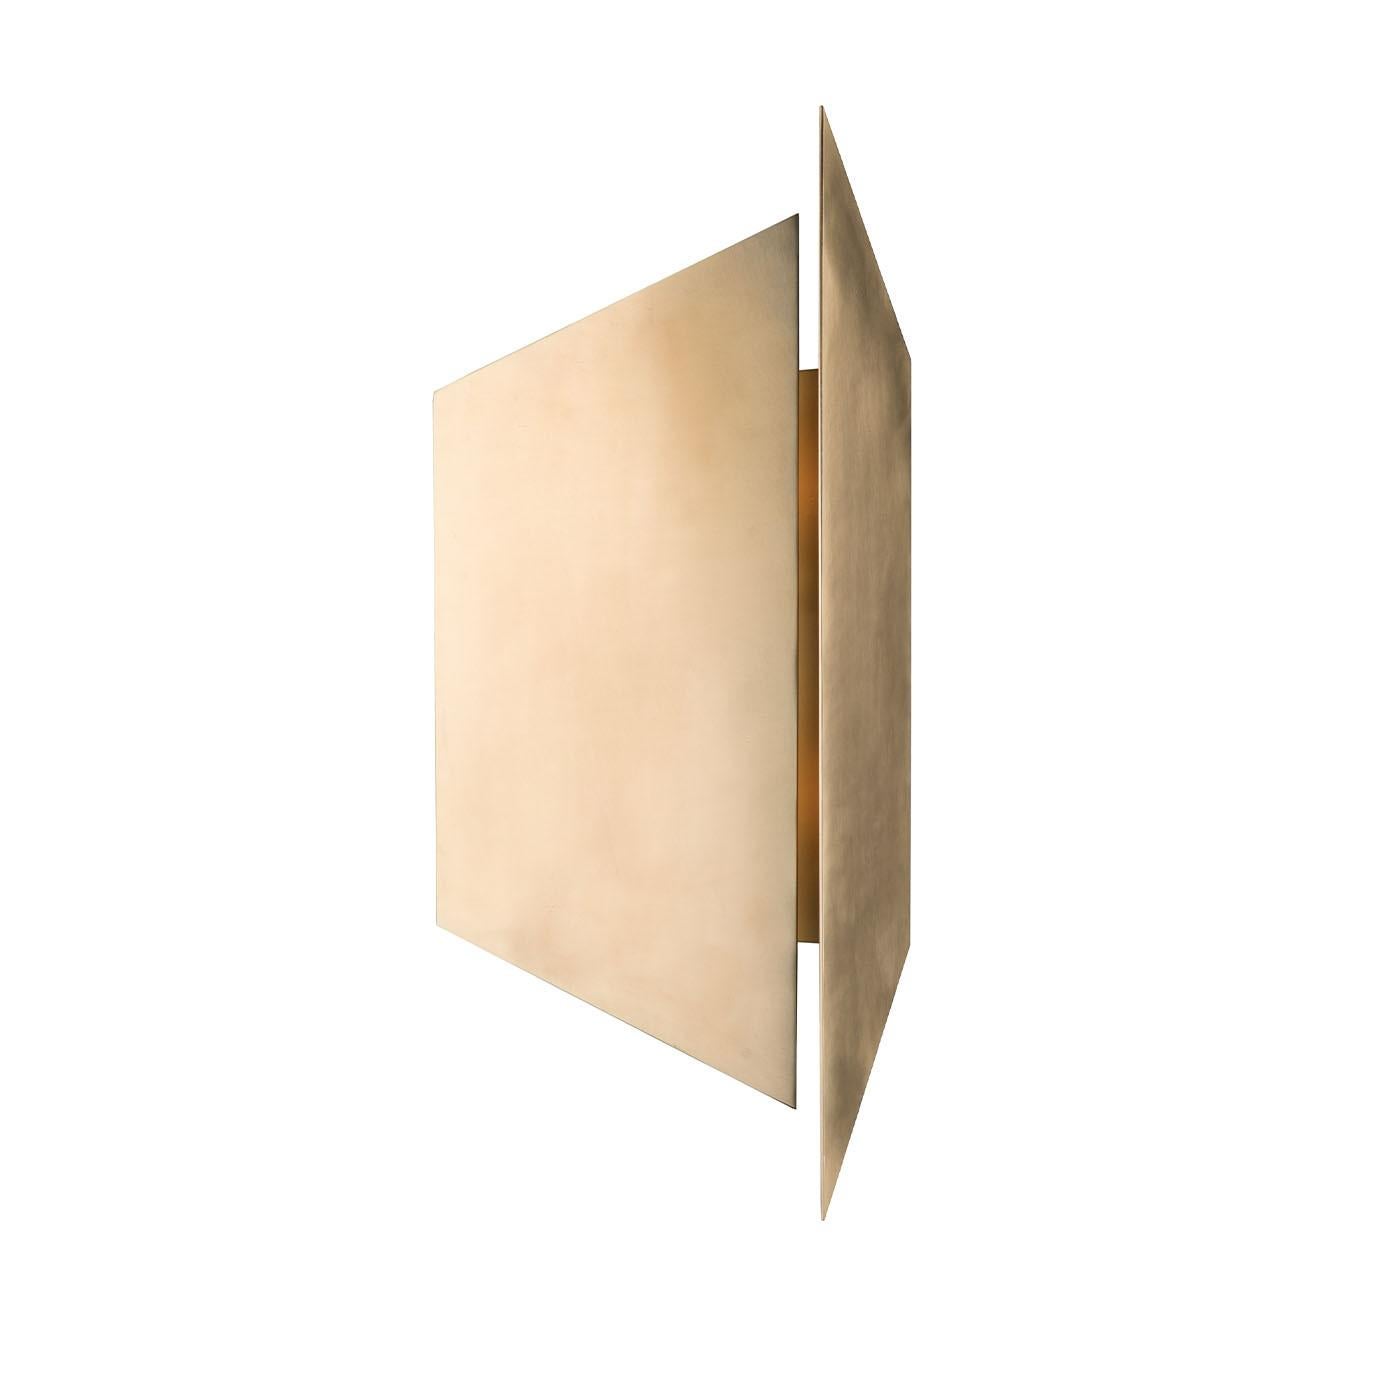 Epitomizing geometric elegance, this wall lamp makes for a splendid addition to refined interiors of contemporary inspiration. The glow radiating from two bulbs - not included - is shaded by a couple of converging bronze plates for a refined